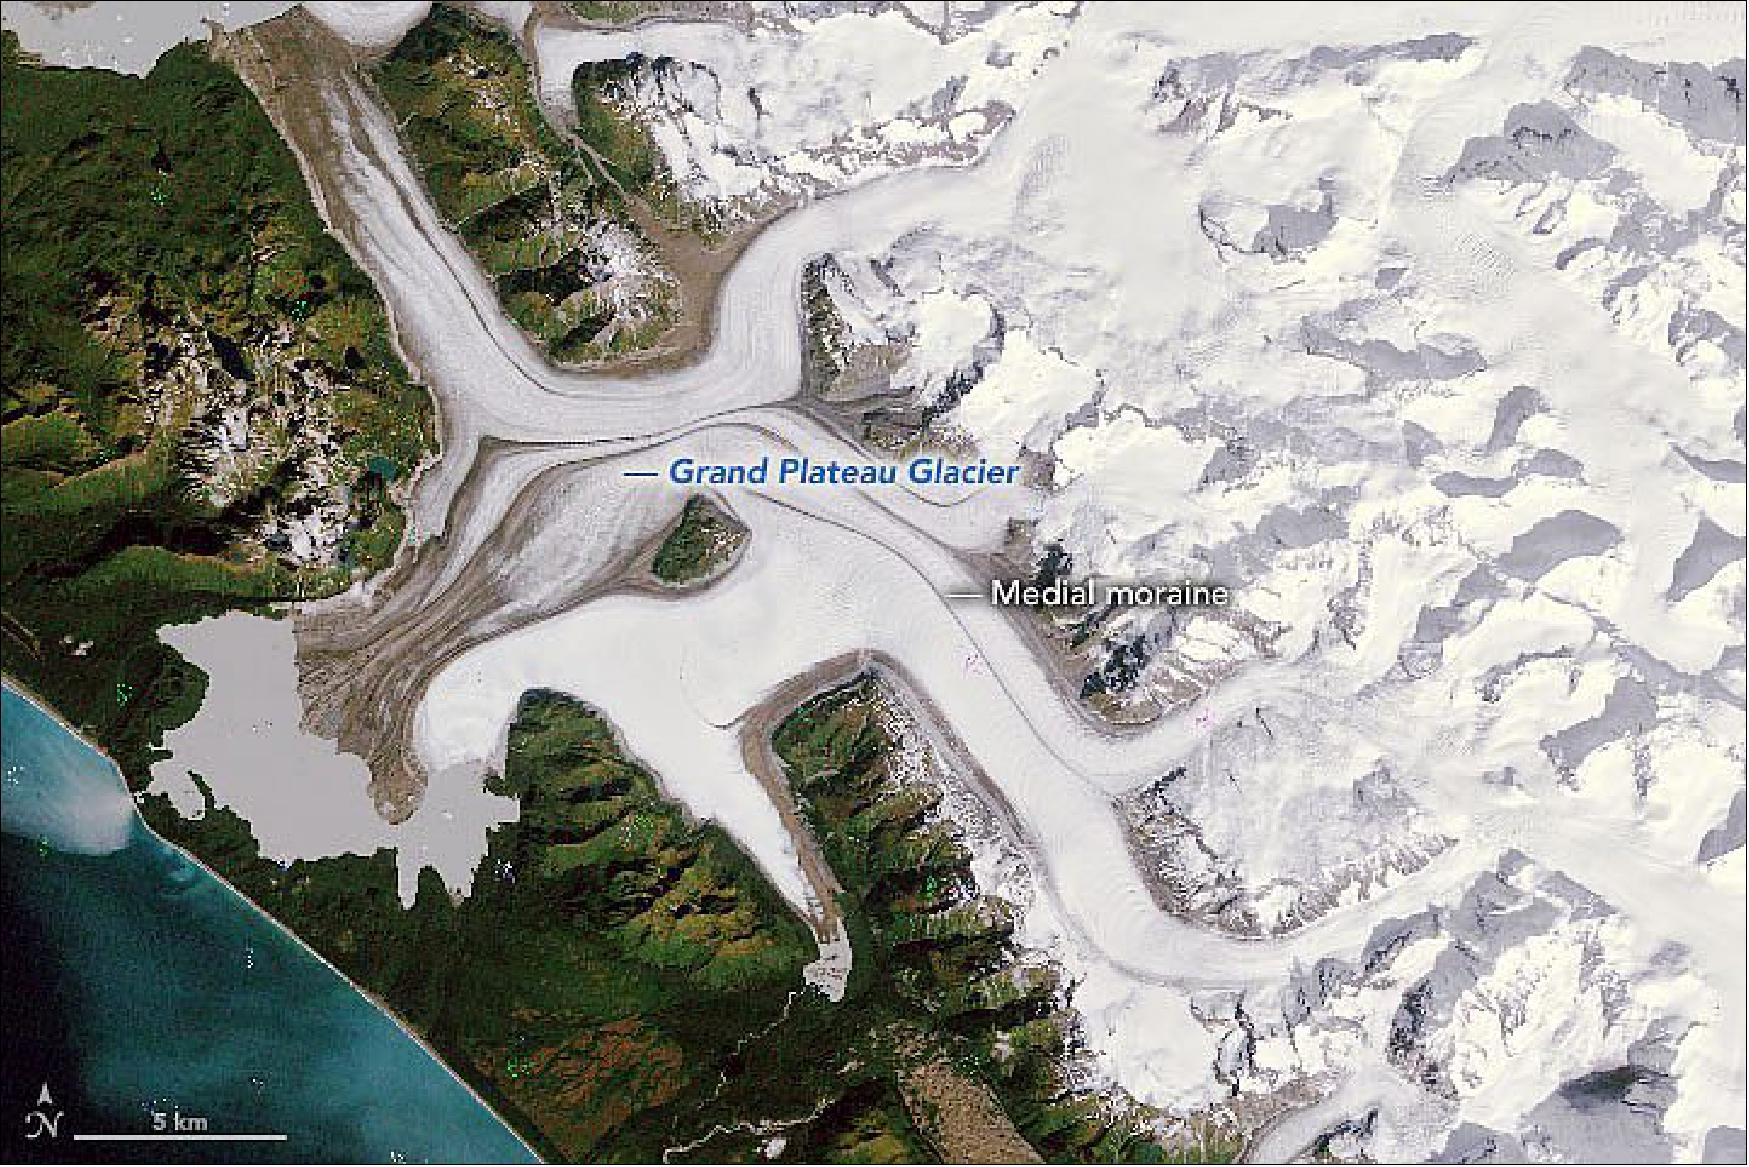 Figure 54: This image of the remote Grand Plateau Glacier, located about 50 km west of Glacier Bay across the Fairweather Range, was acquired on September 7, 1984, with Landsat-5 (image credit: NASA Earth Observatory, images by Joshua Stevens, using Landsat data from the U.S. Geological Survey, topographic data from the Shuttle Radar Topography Mission (SRTM), and land cover data from the Multi-Resolution Land Characteristics (MRLC) Consortium. Story by Kathryn Hansen)